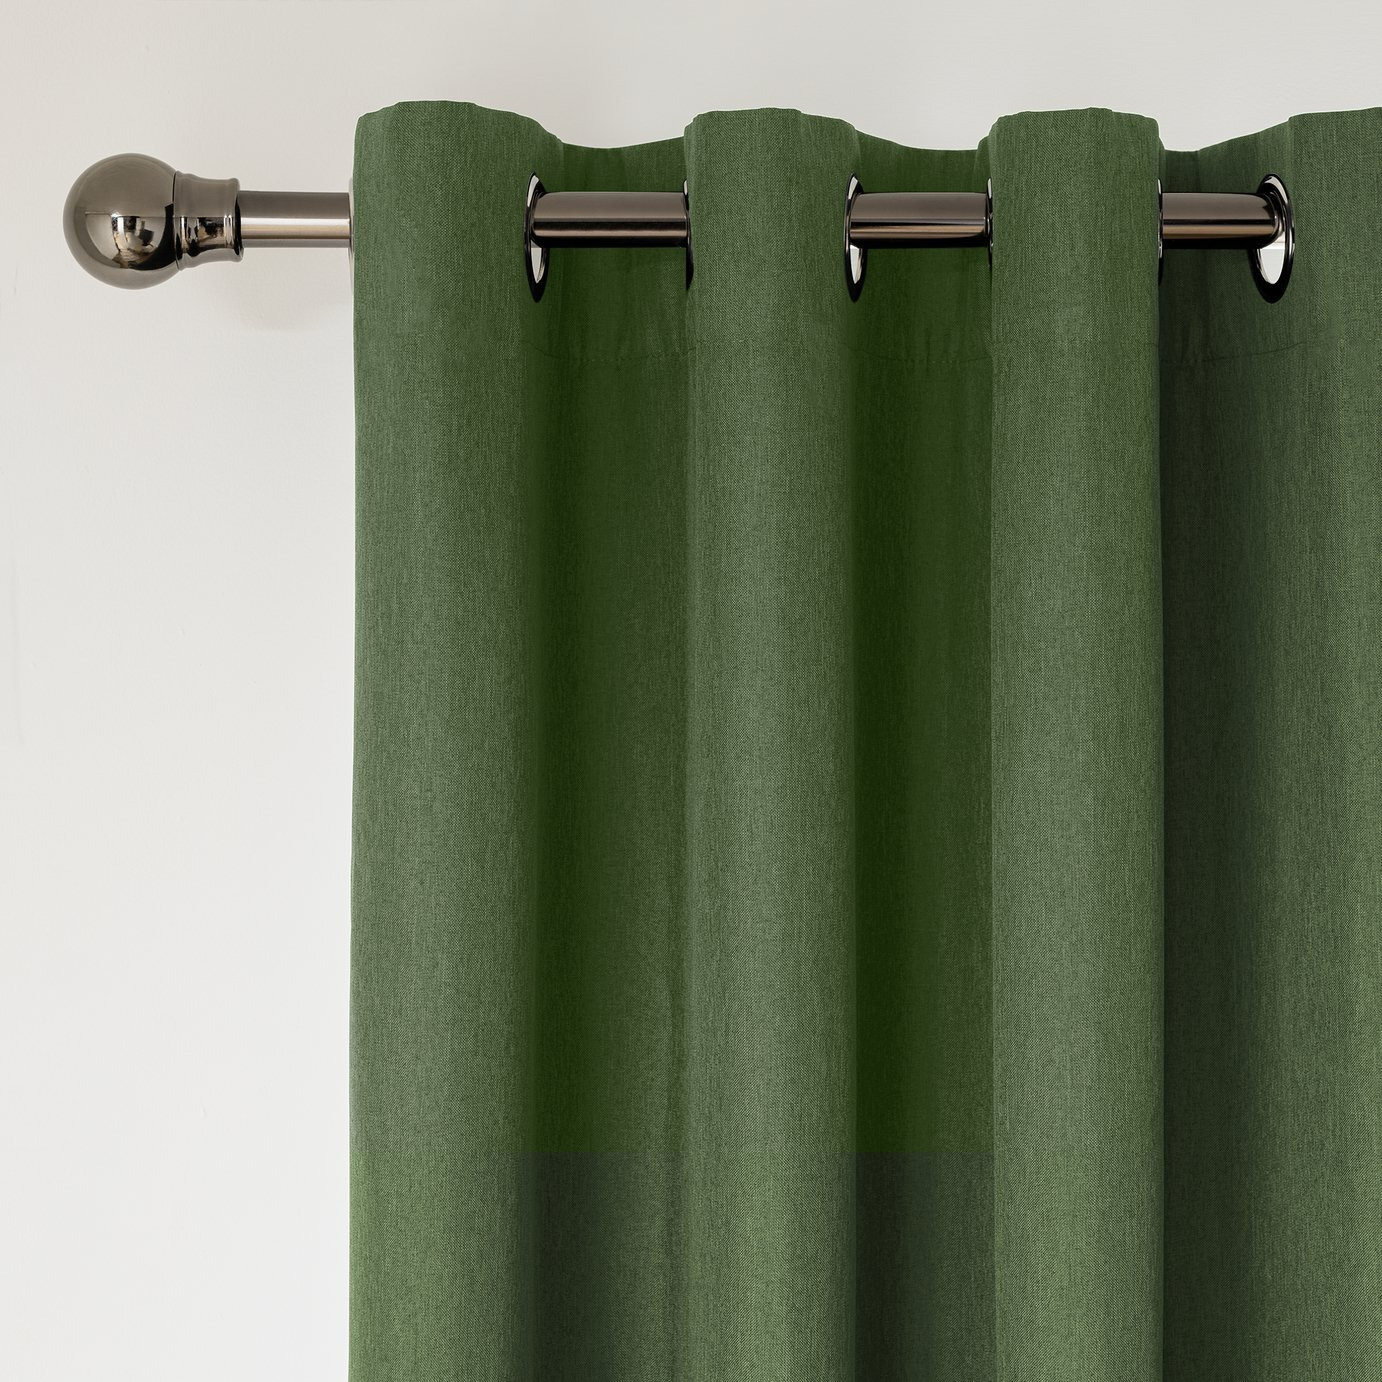 Home Essentials Plain Blackout Eyelet Curtain - Green - image 1